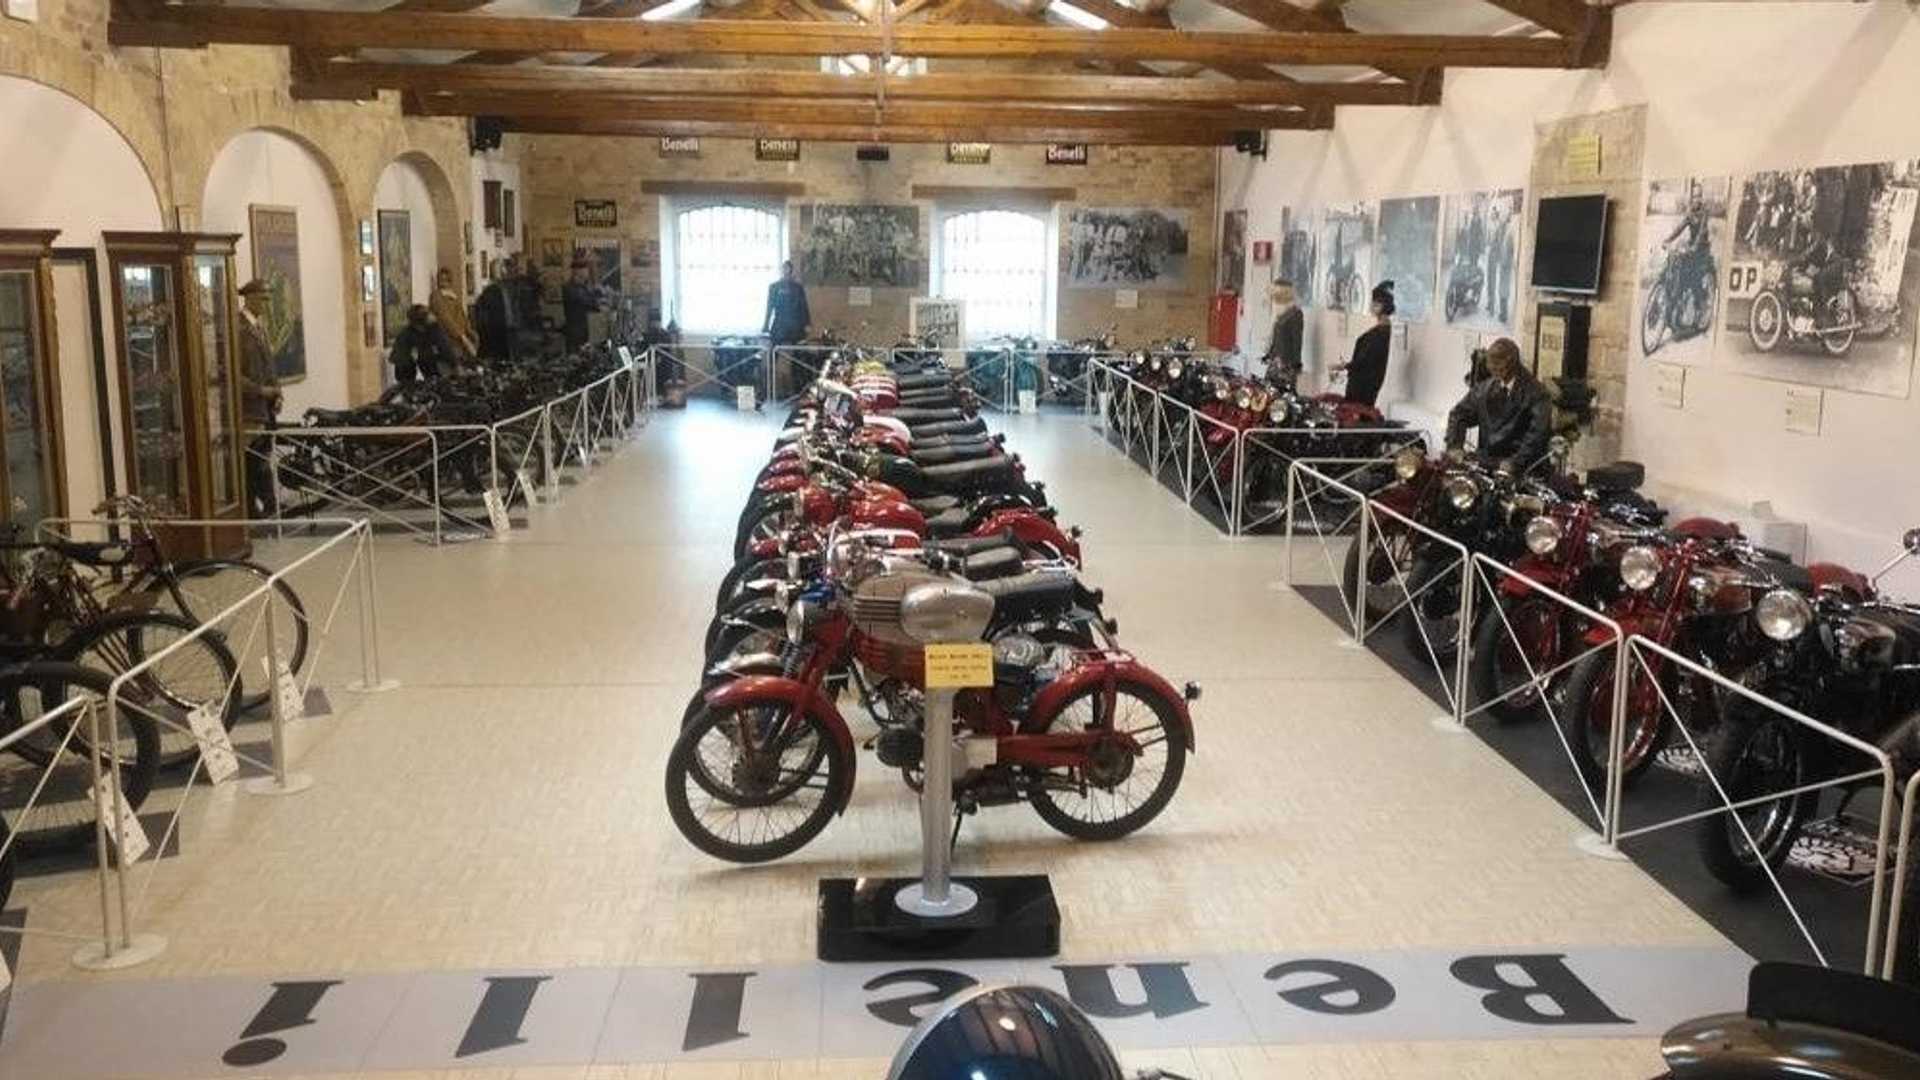 An image from inside the Benelli Museum in Pesaro, Italy